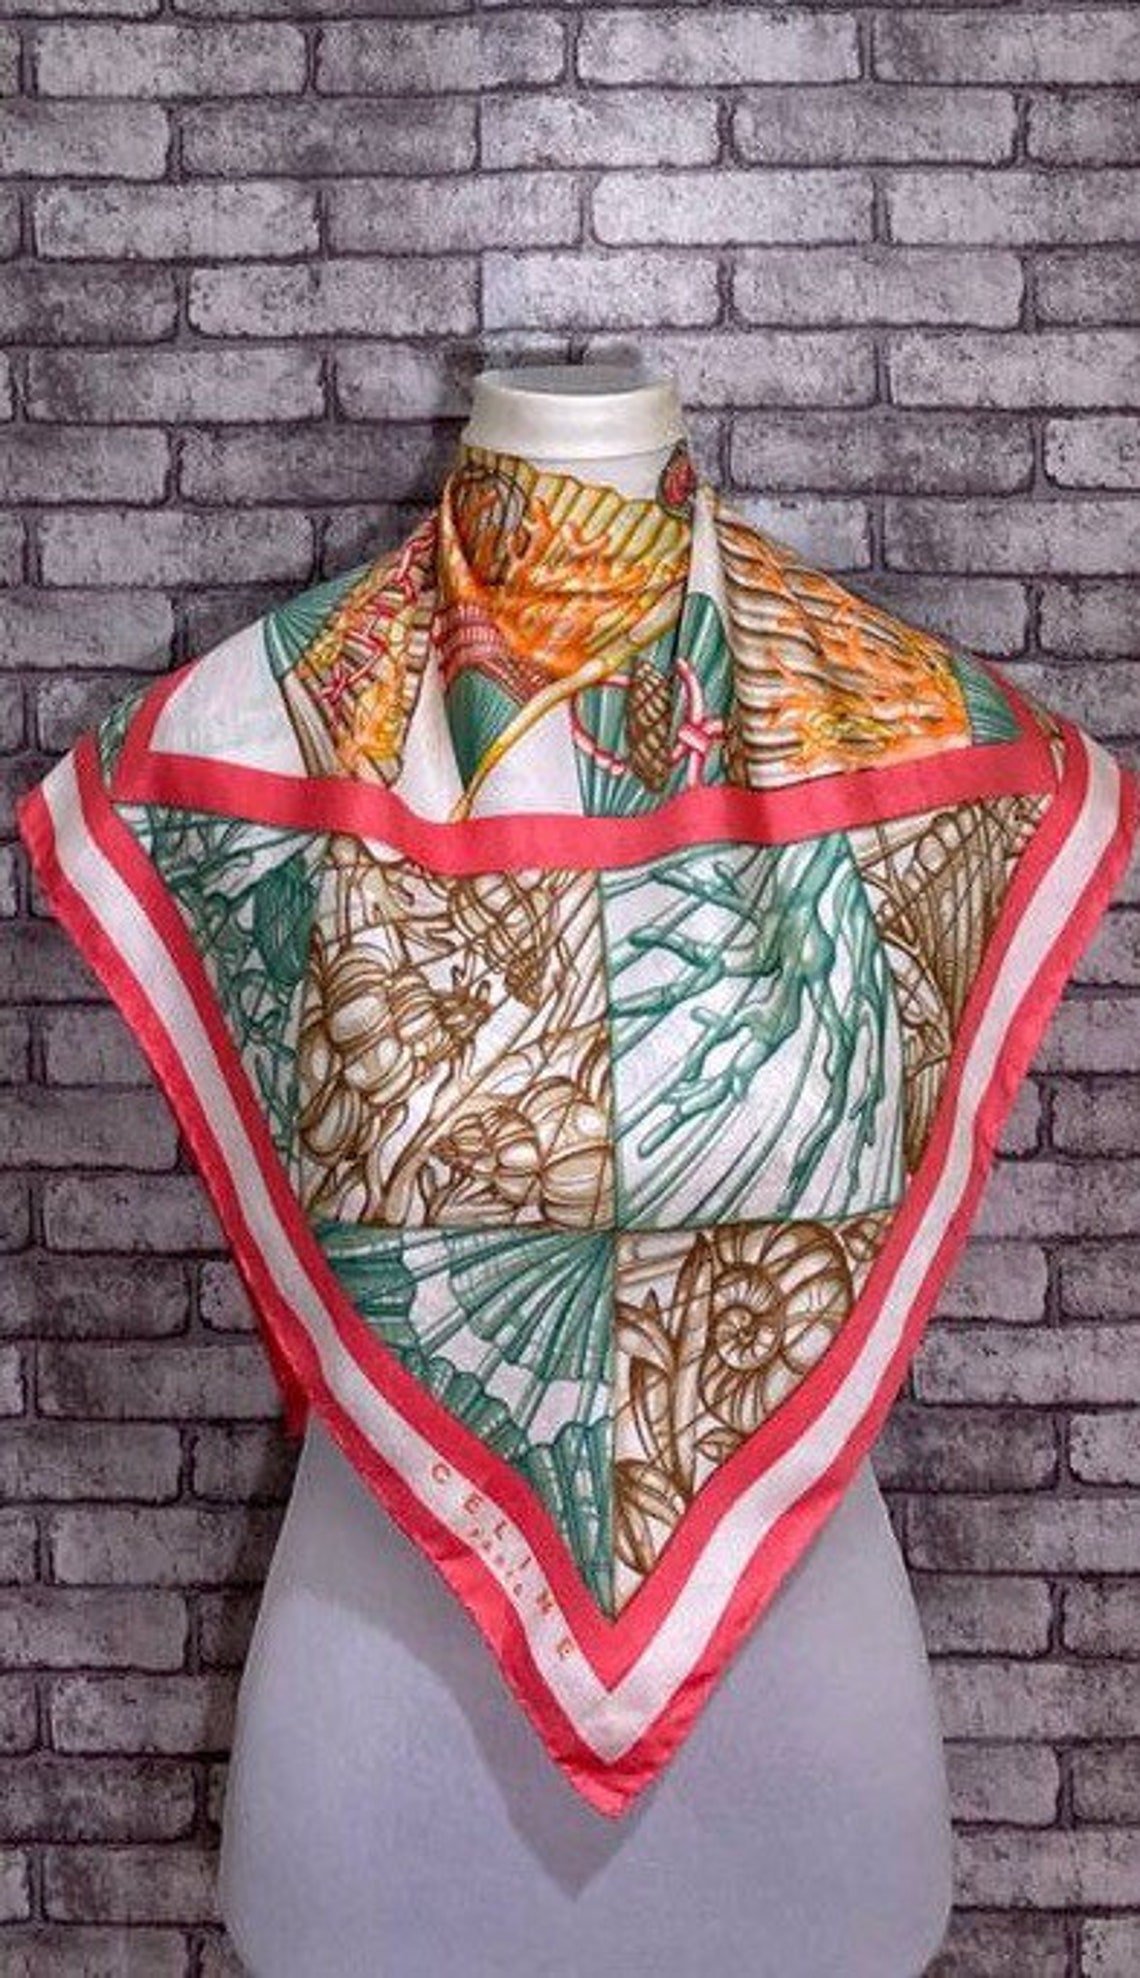 Free shipping Authentic Celine silk scarf | Etsy